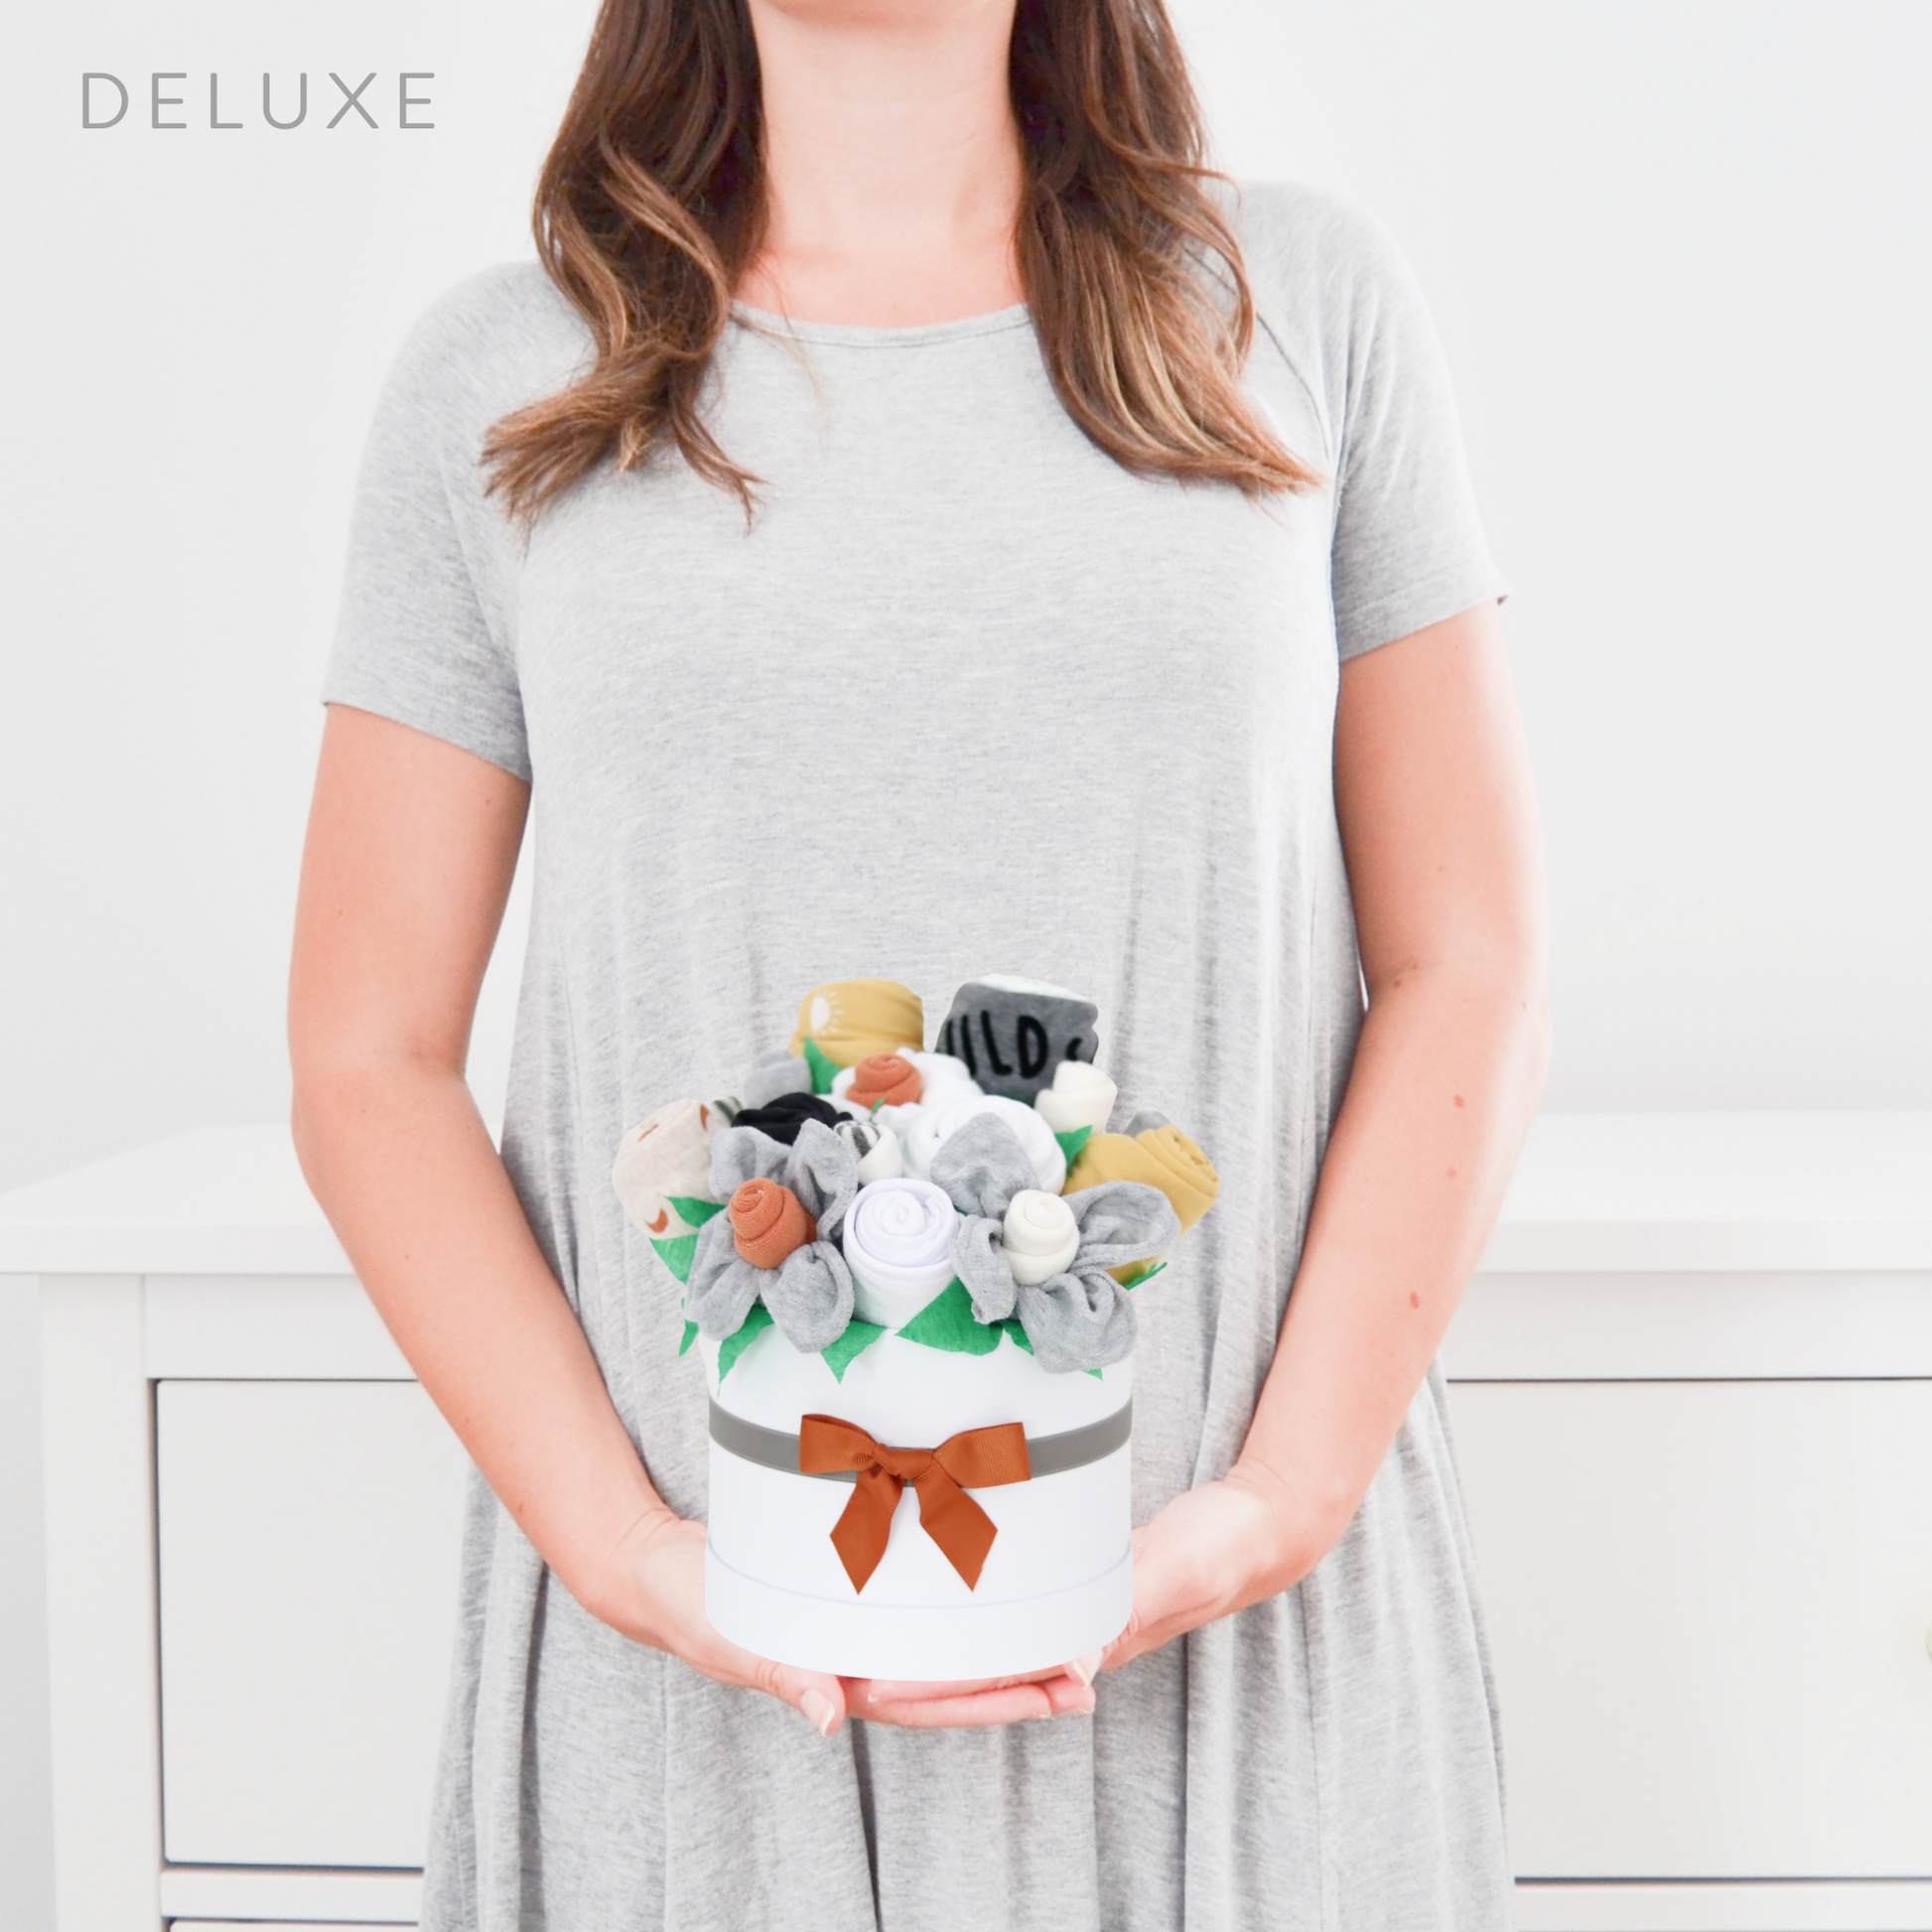 deluxe neural southwest baby blossom with model